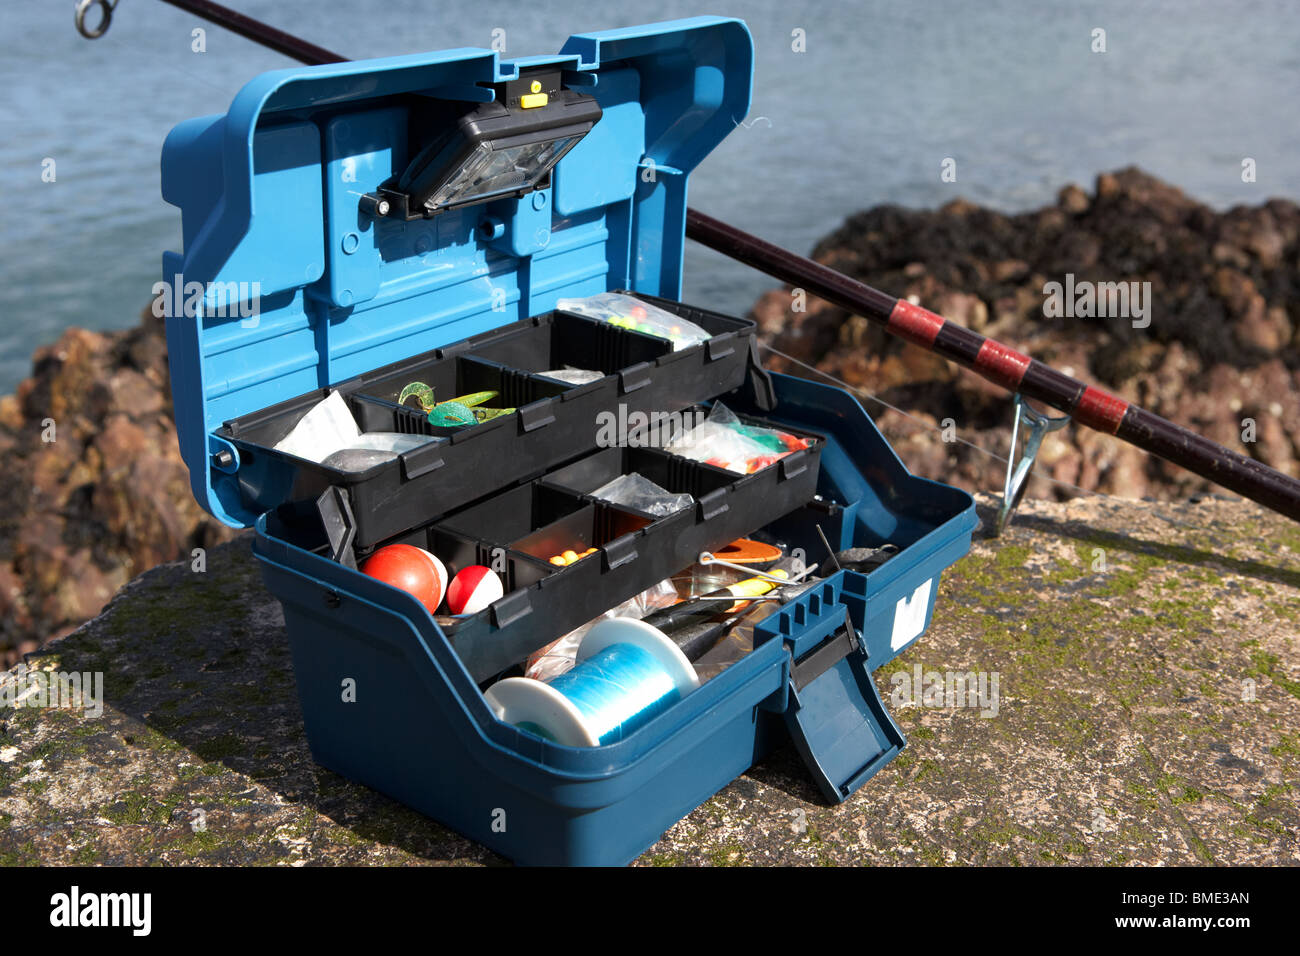 https://c8.alamy.com/comp/BME3AN/fishing-tackle-box-filled-with-sea-fishing-gear-and-rod-on-the-county-BME3AN.jpg